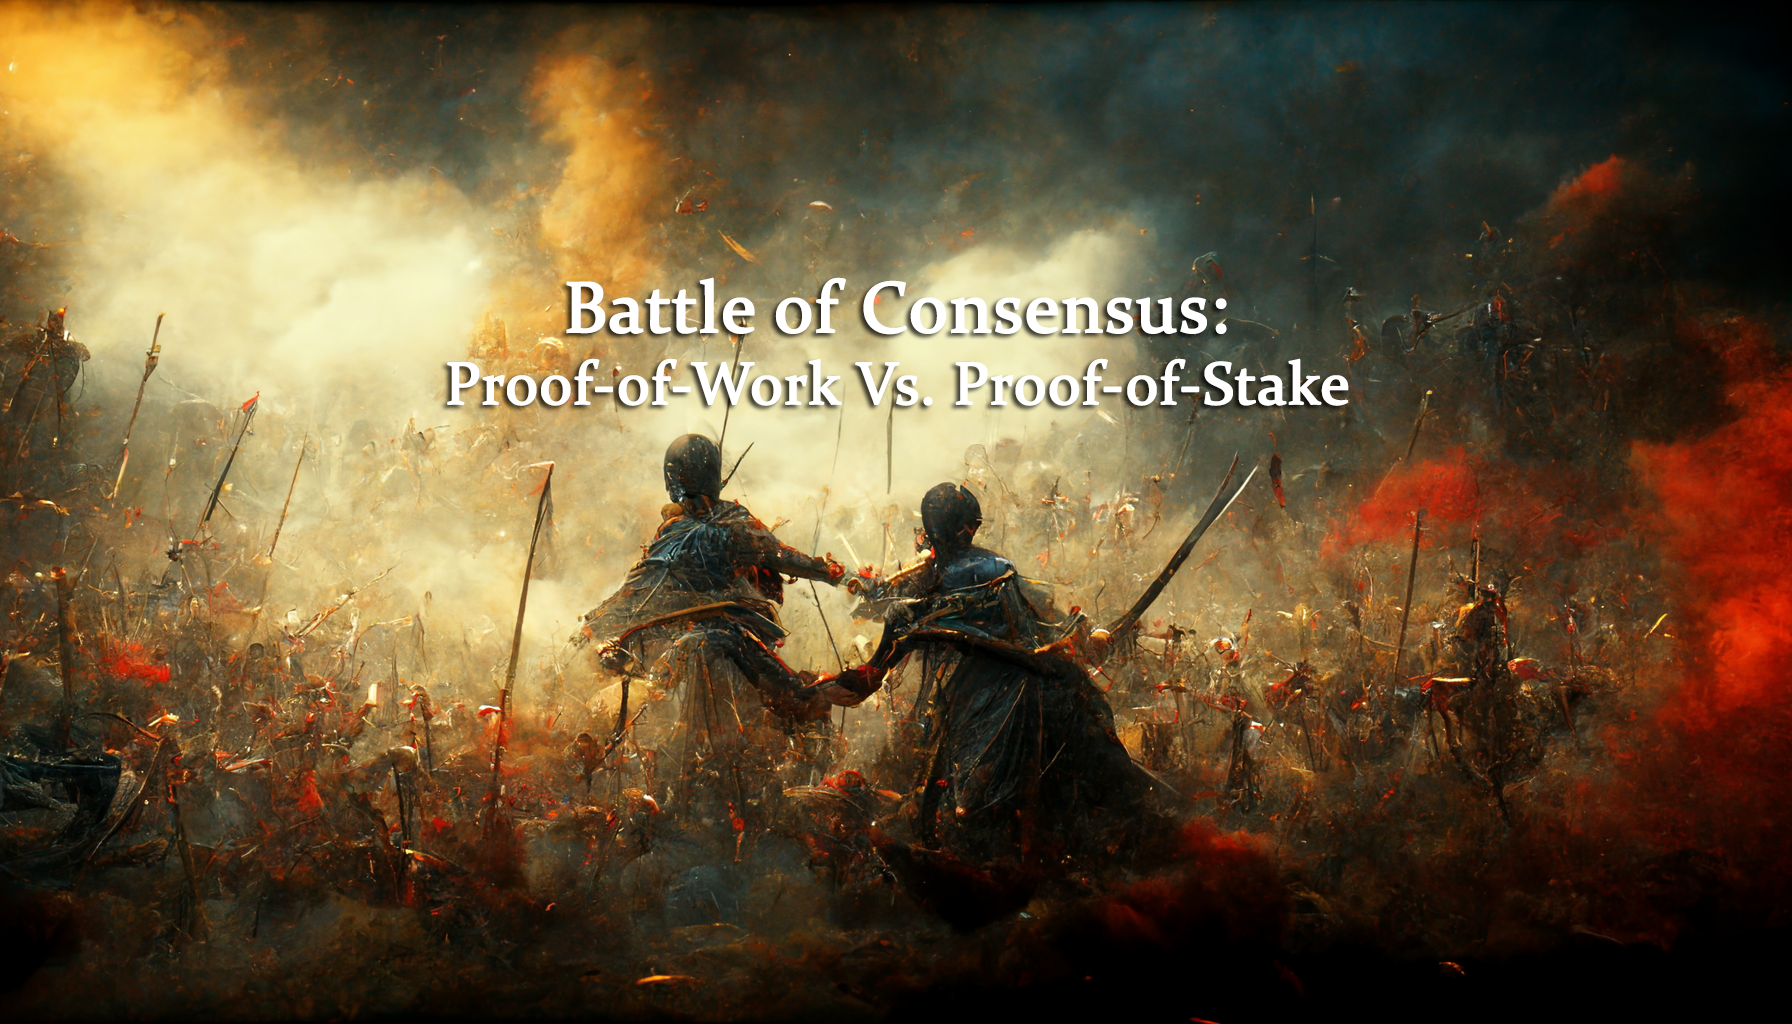 Battle of Consensus: Proof-of-Work Vs. Proof-of-Stake